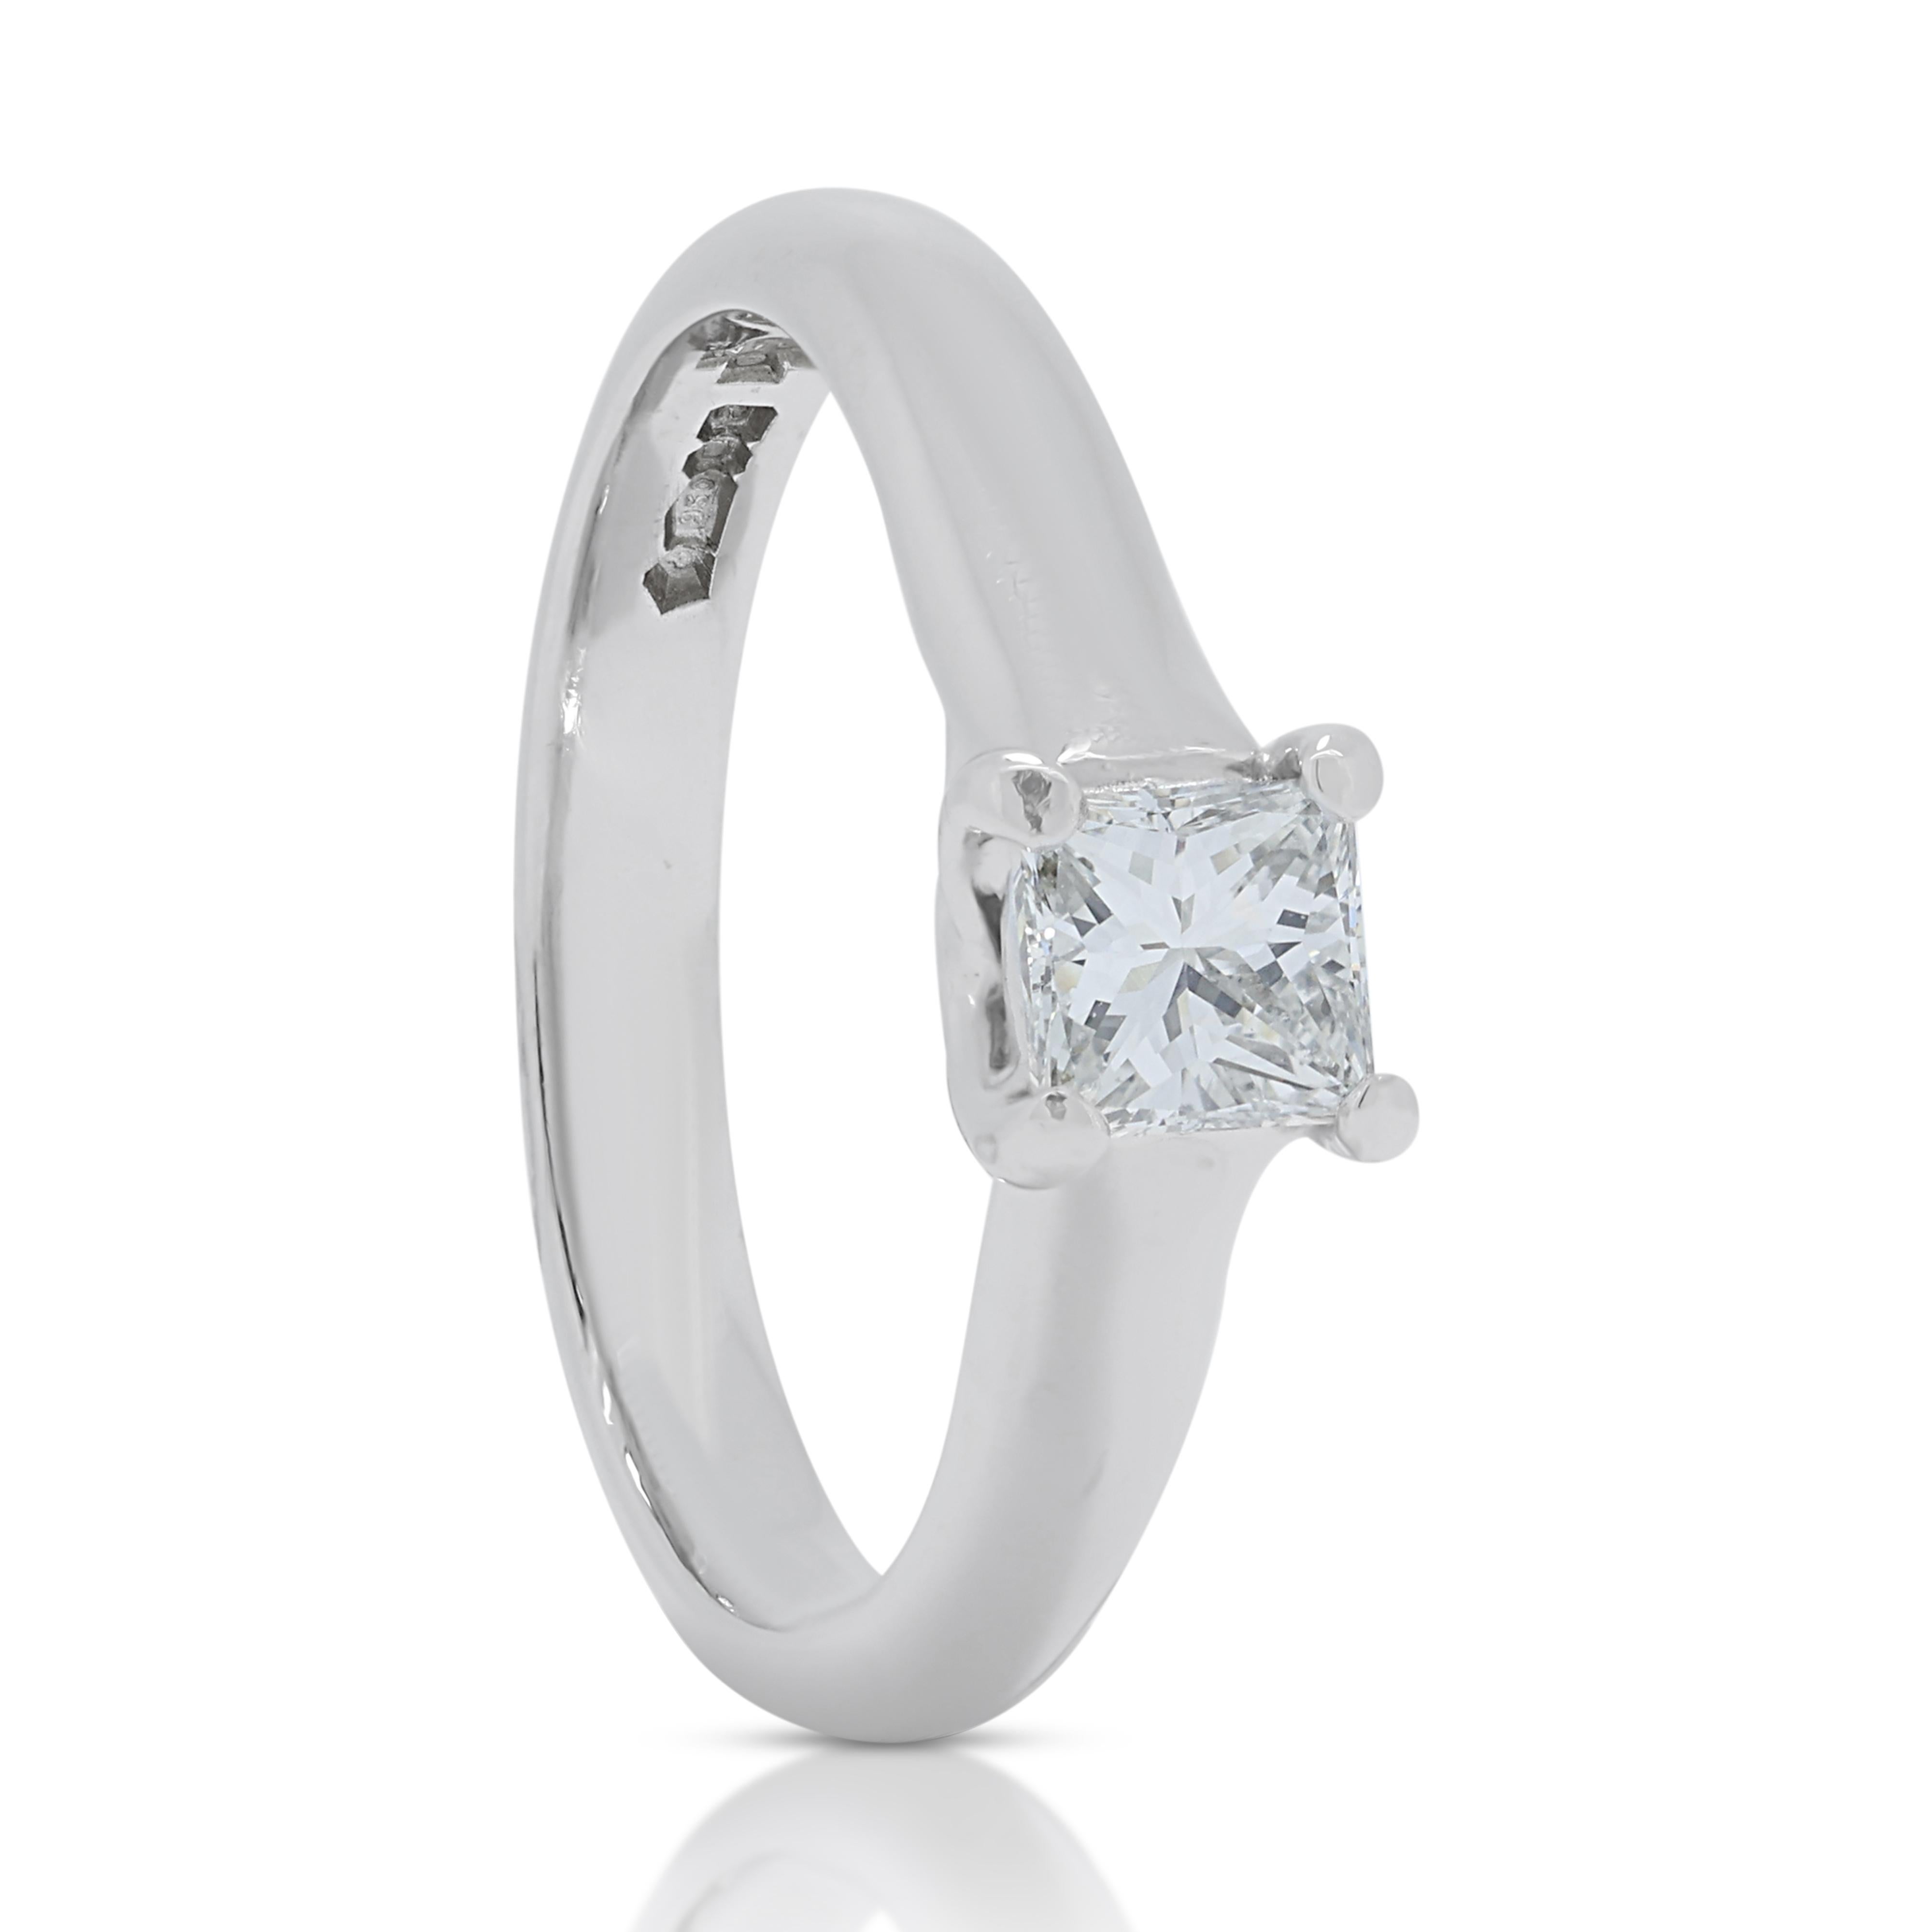 Elegant 0.40ct Diamond Solitaire Ring in 14K White Gold In Excellent Condition For Sale In רמת גן, IL